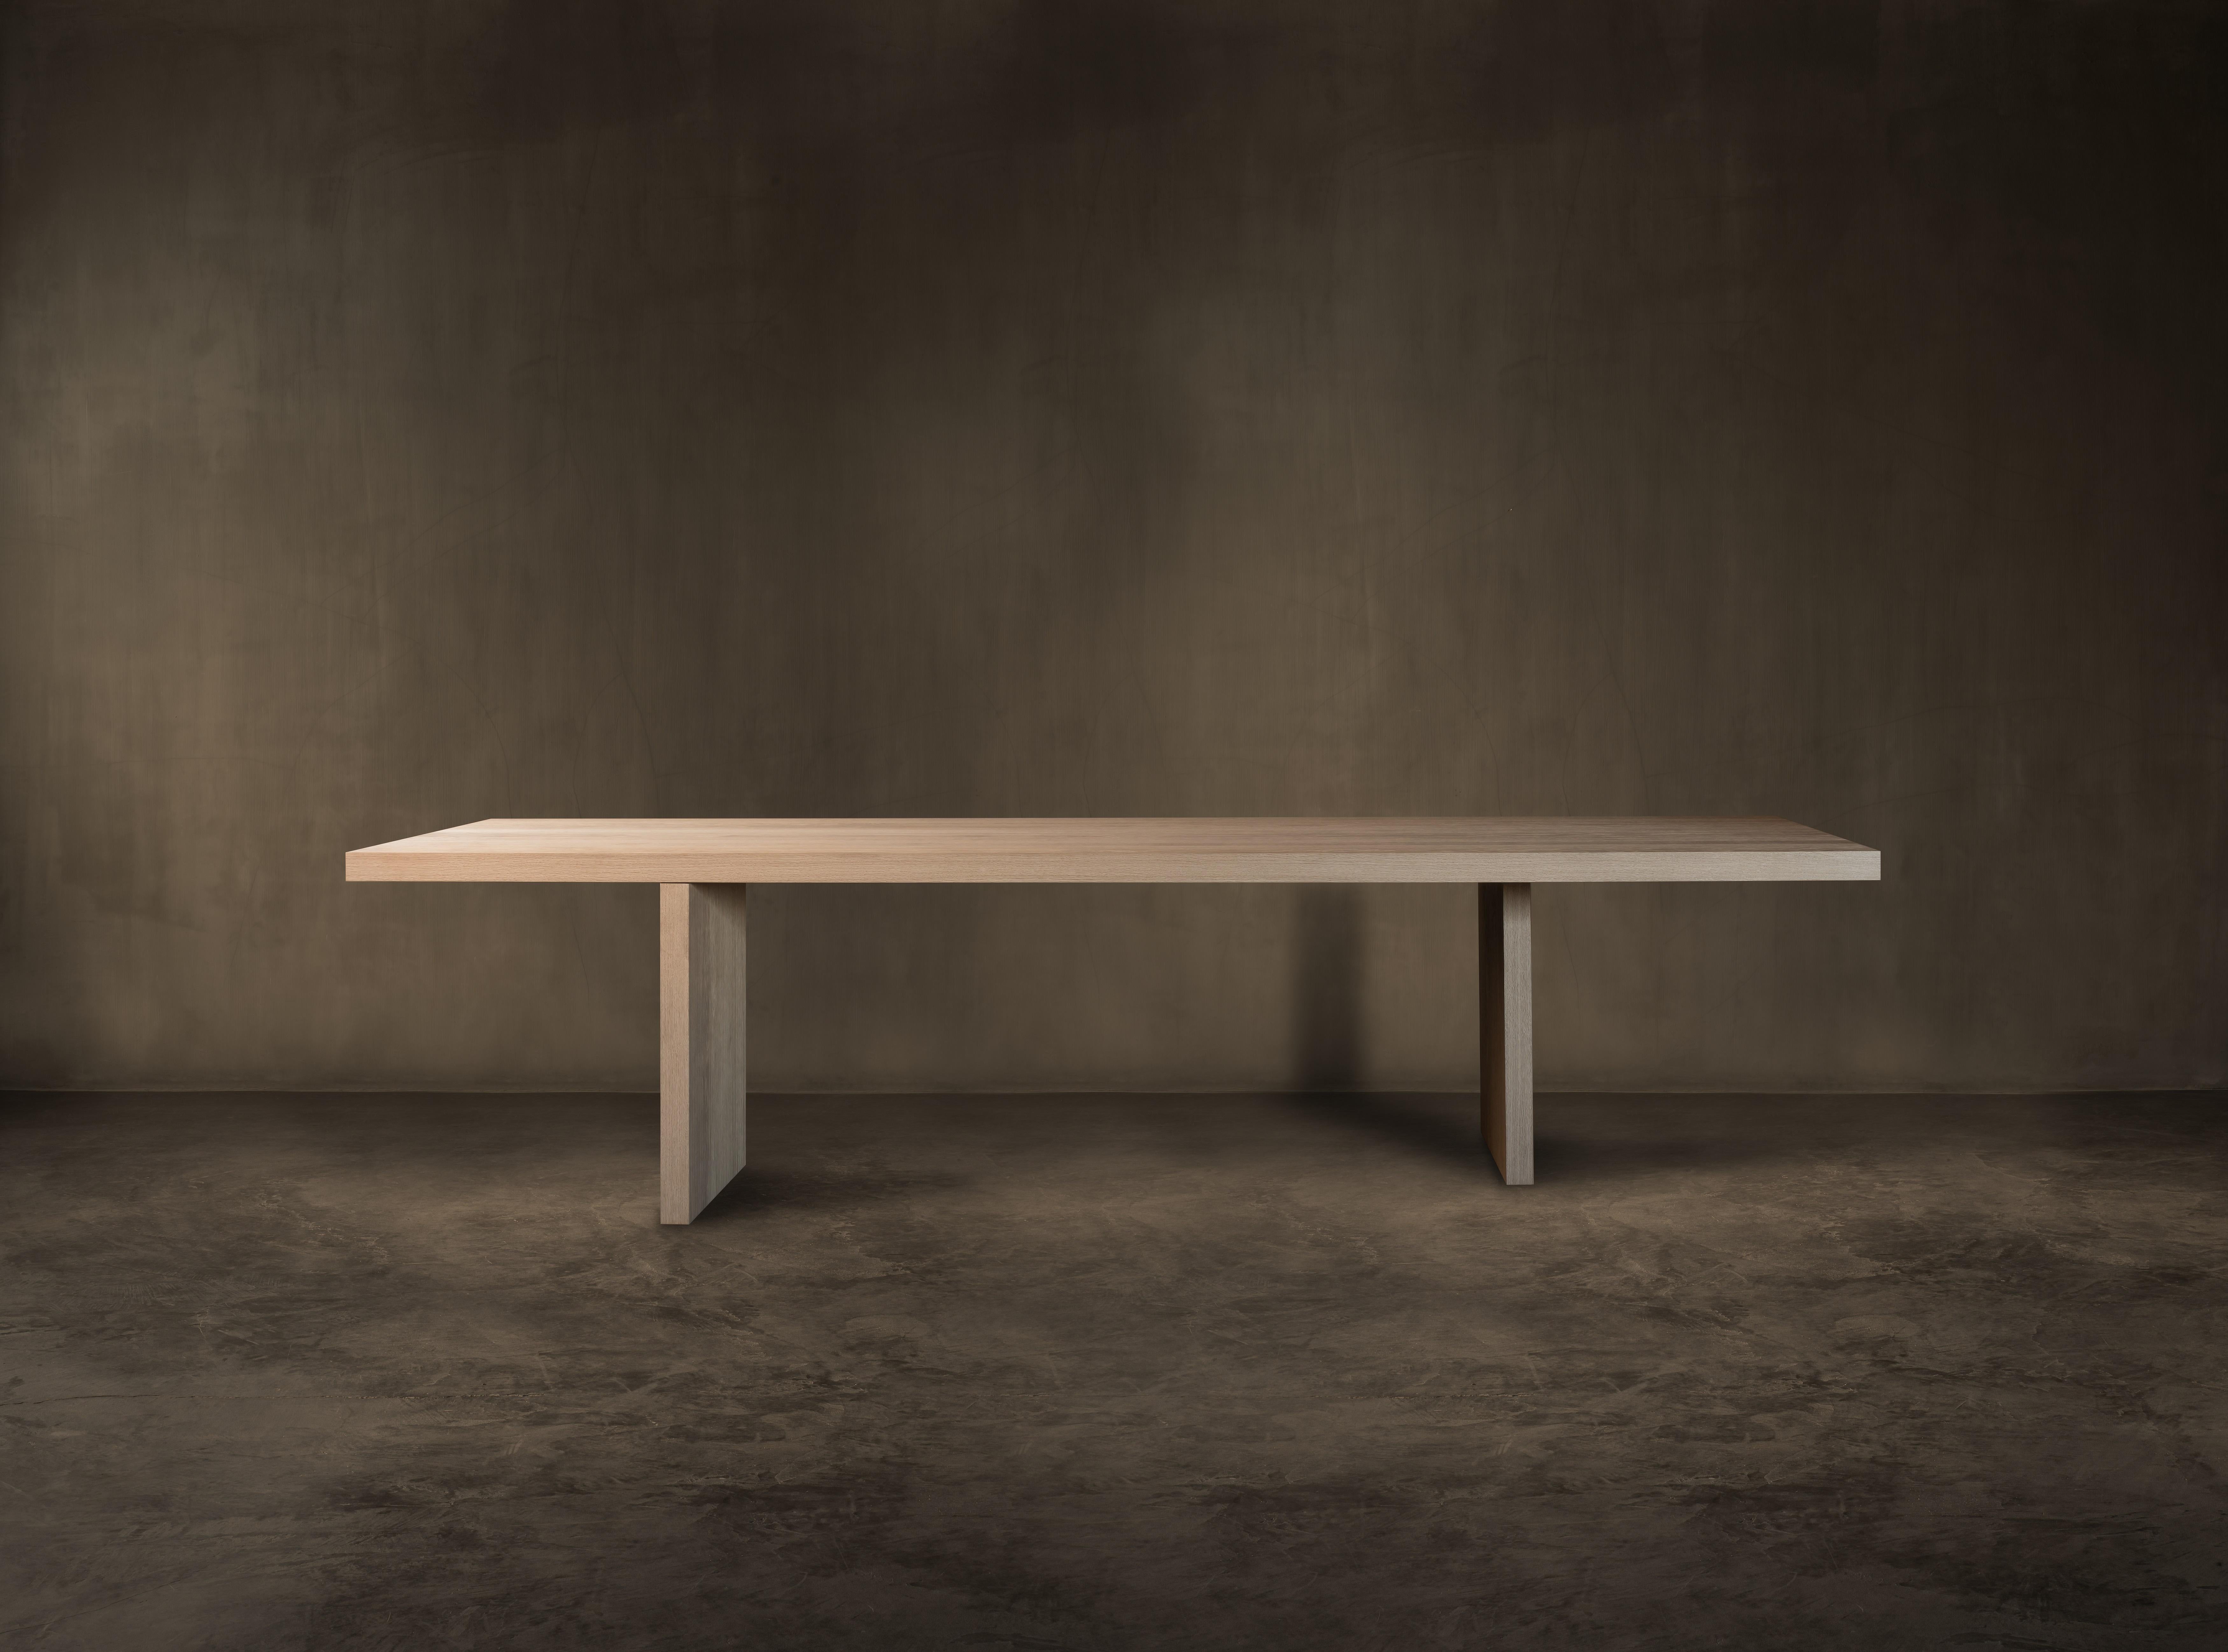 Float table by Kana Objects
Dimensions: D 110 x W 260 x H 73 cm
Materials: Natural oak.
Available in other sizes: 260, 280, 300, and 320 cm.
Also available in smoked oak. 

The diagonal positioning of Float’s legs, handmade in noble oak